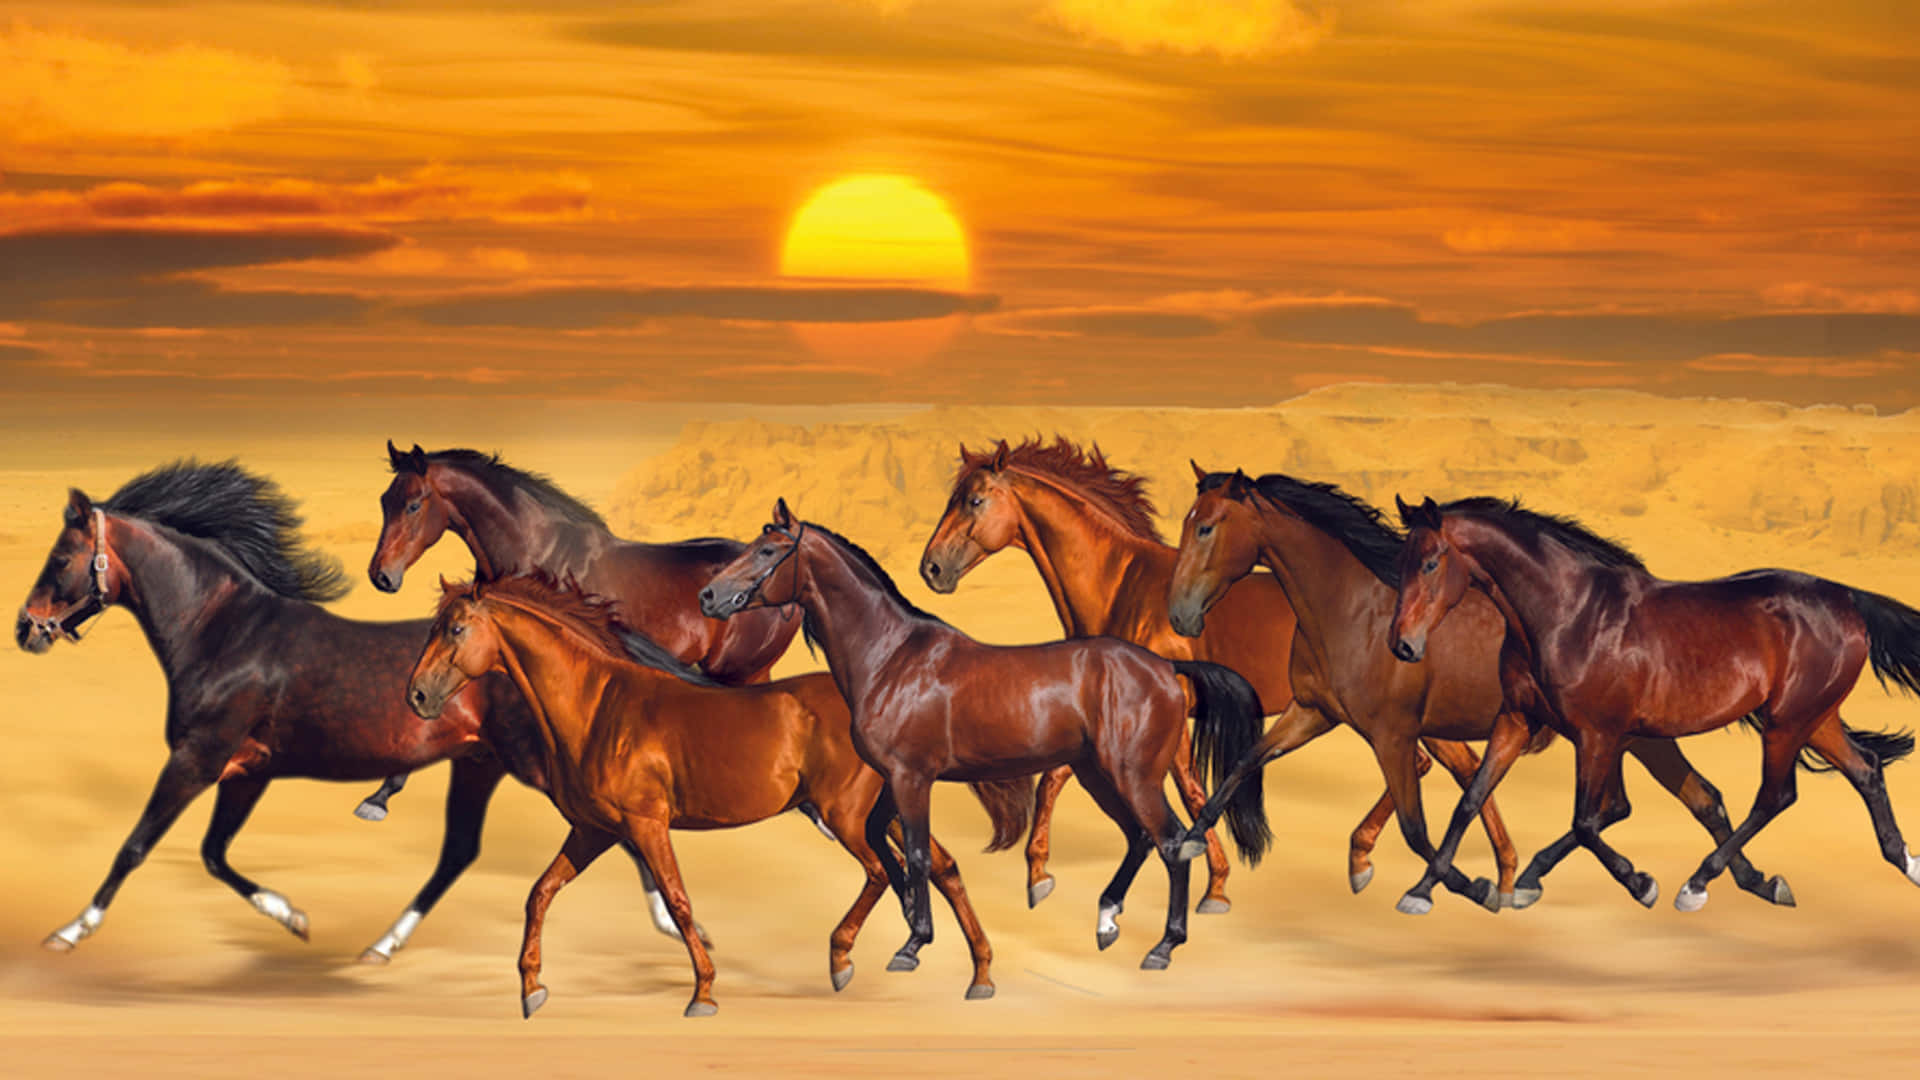 7 Brown Horses Walking On Sand Background